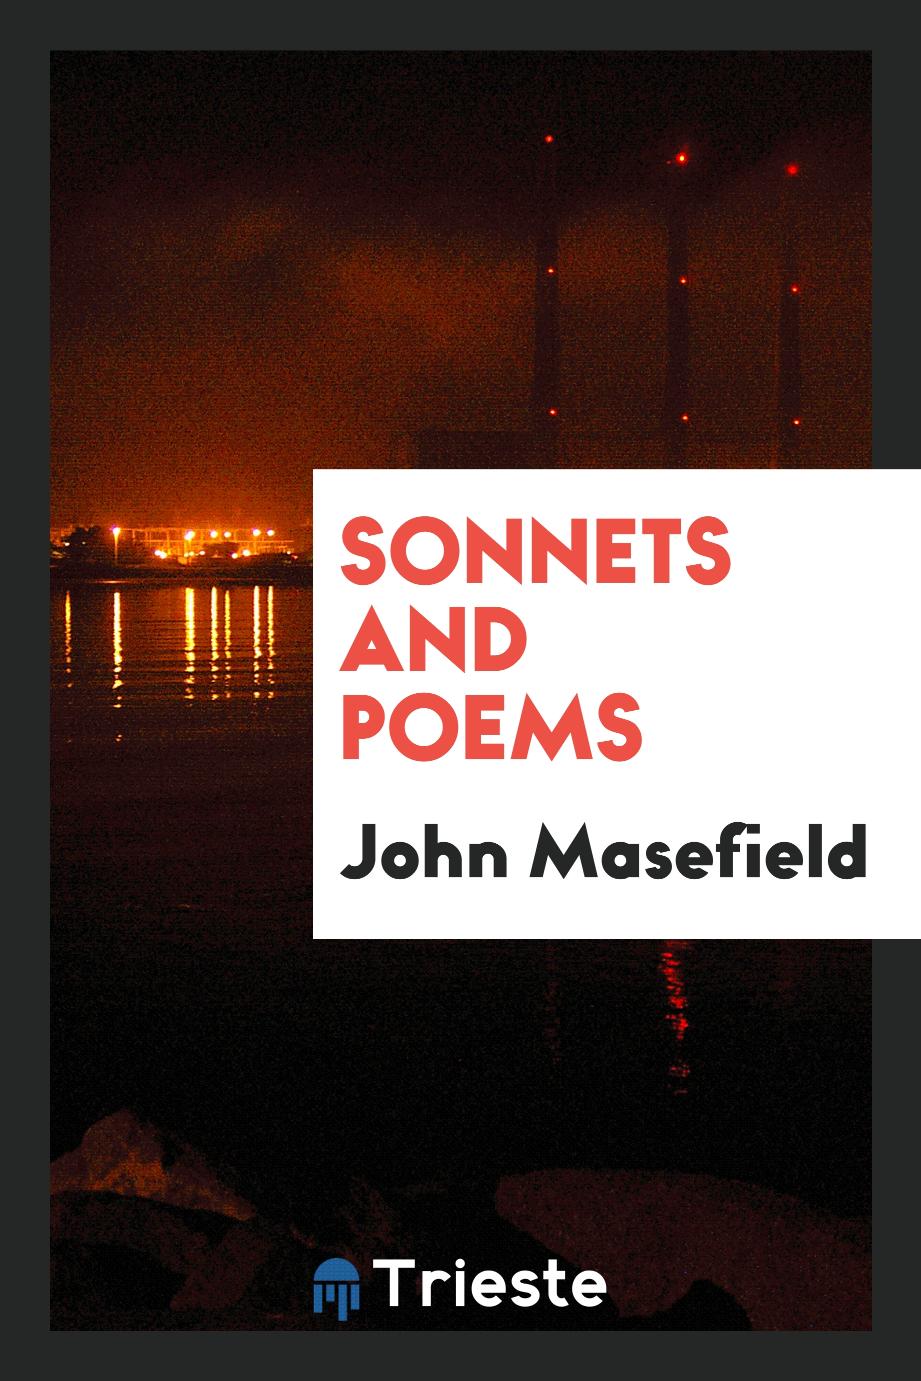 Sonnets and poems